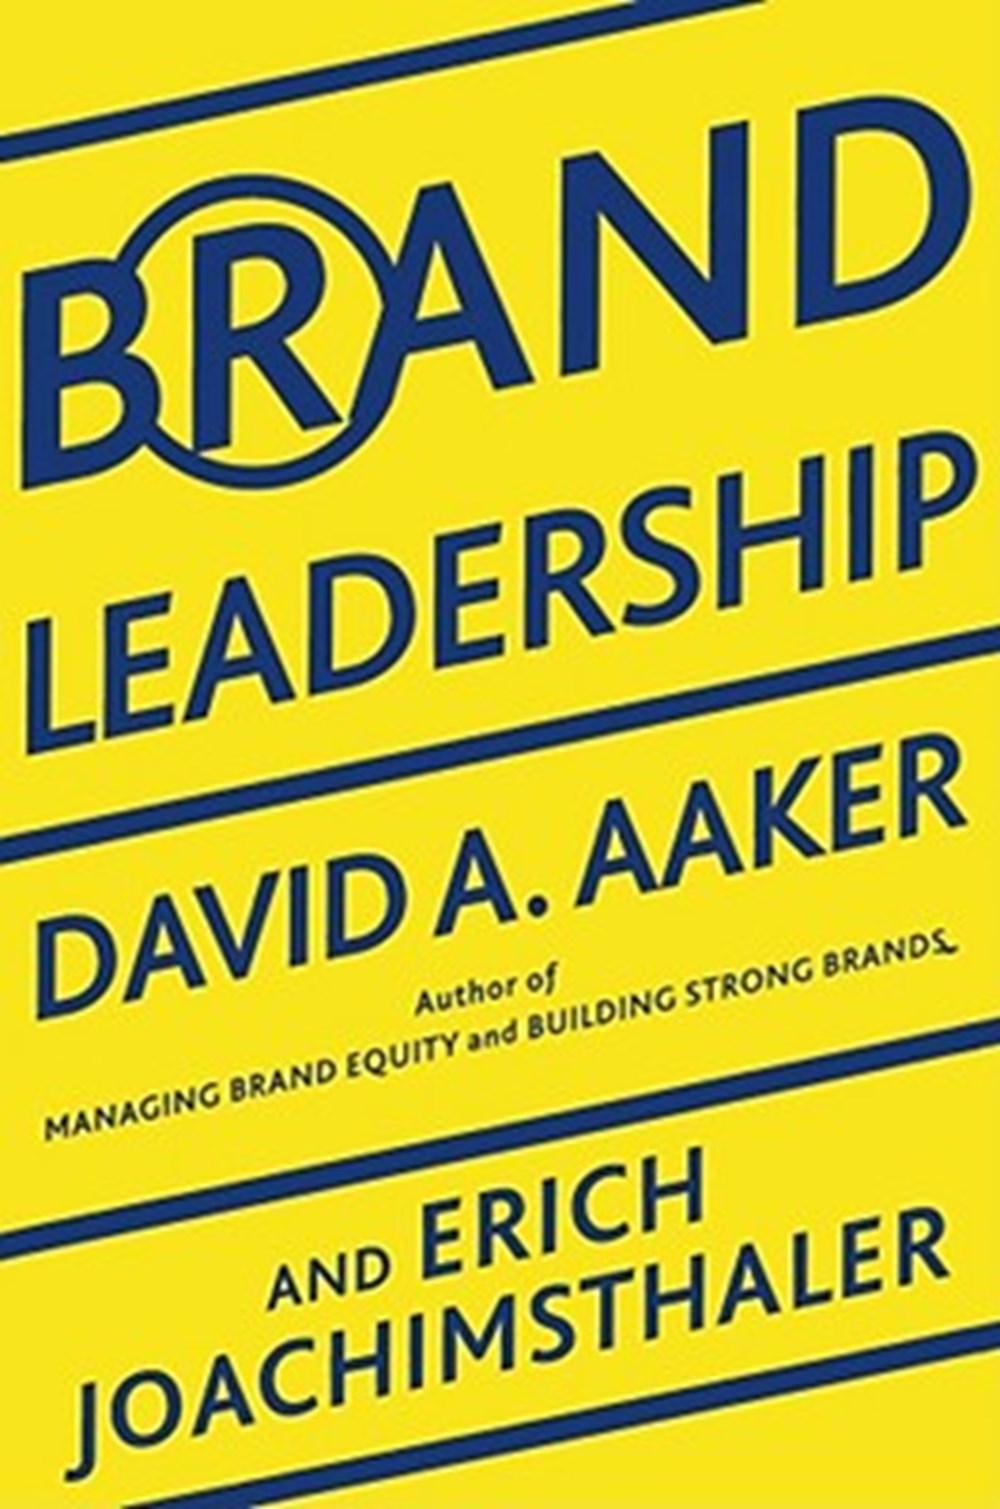 Brand Leadership Building Assets in an Information Economy